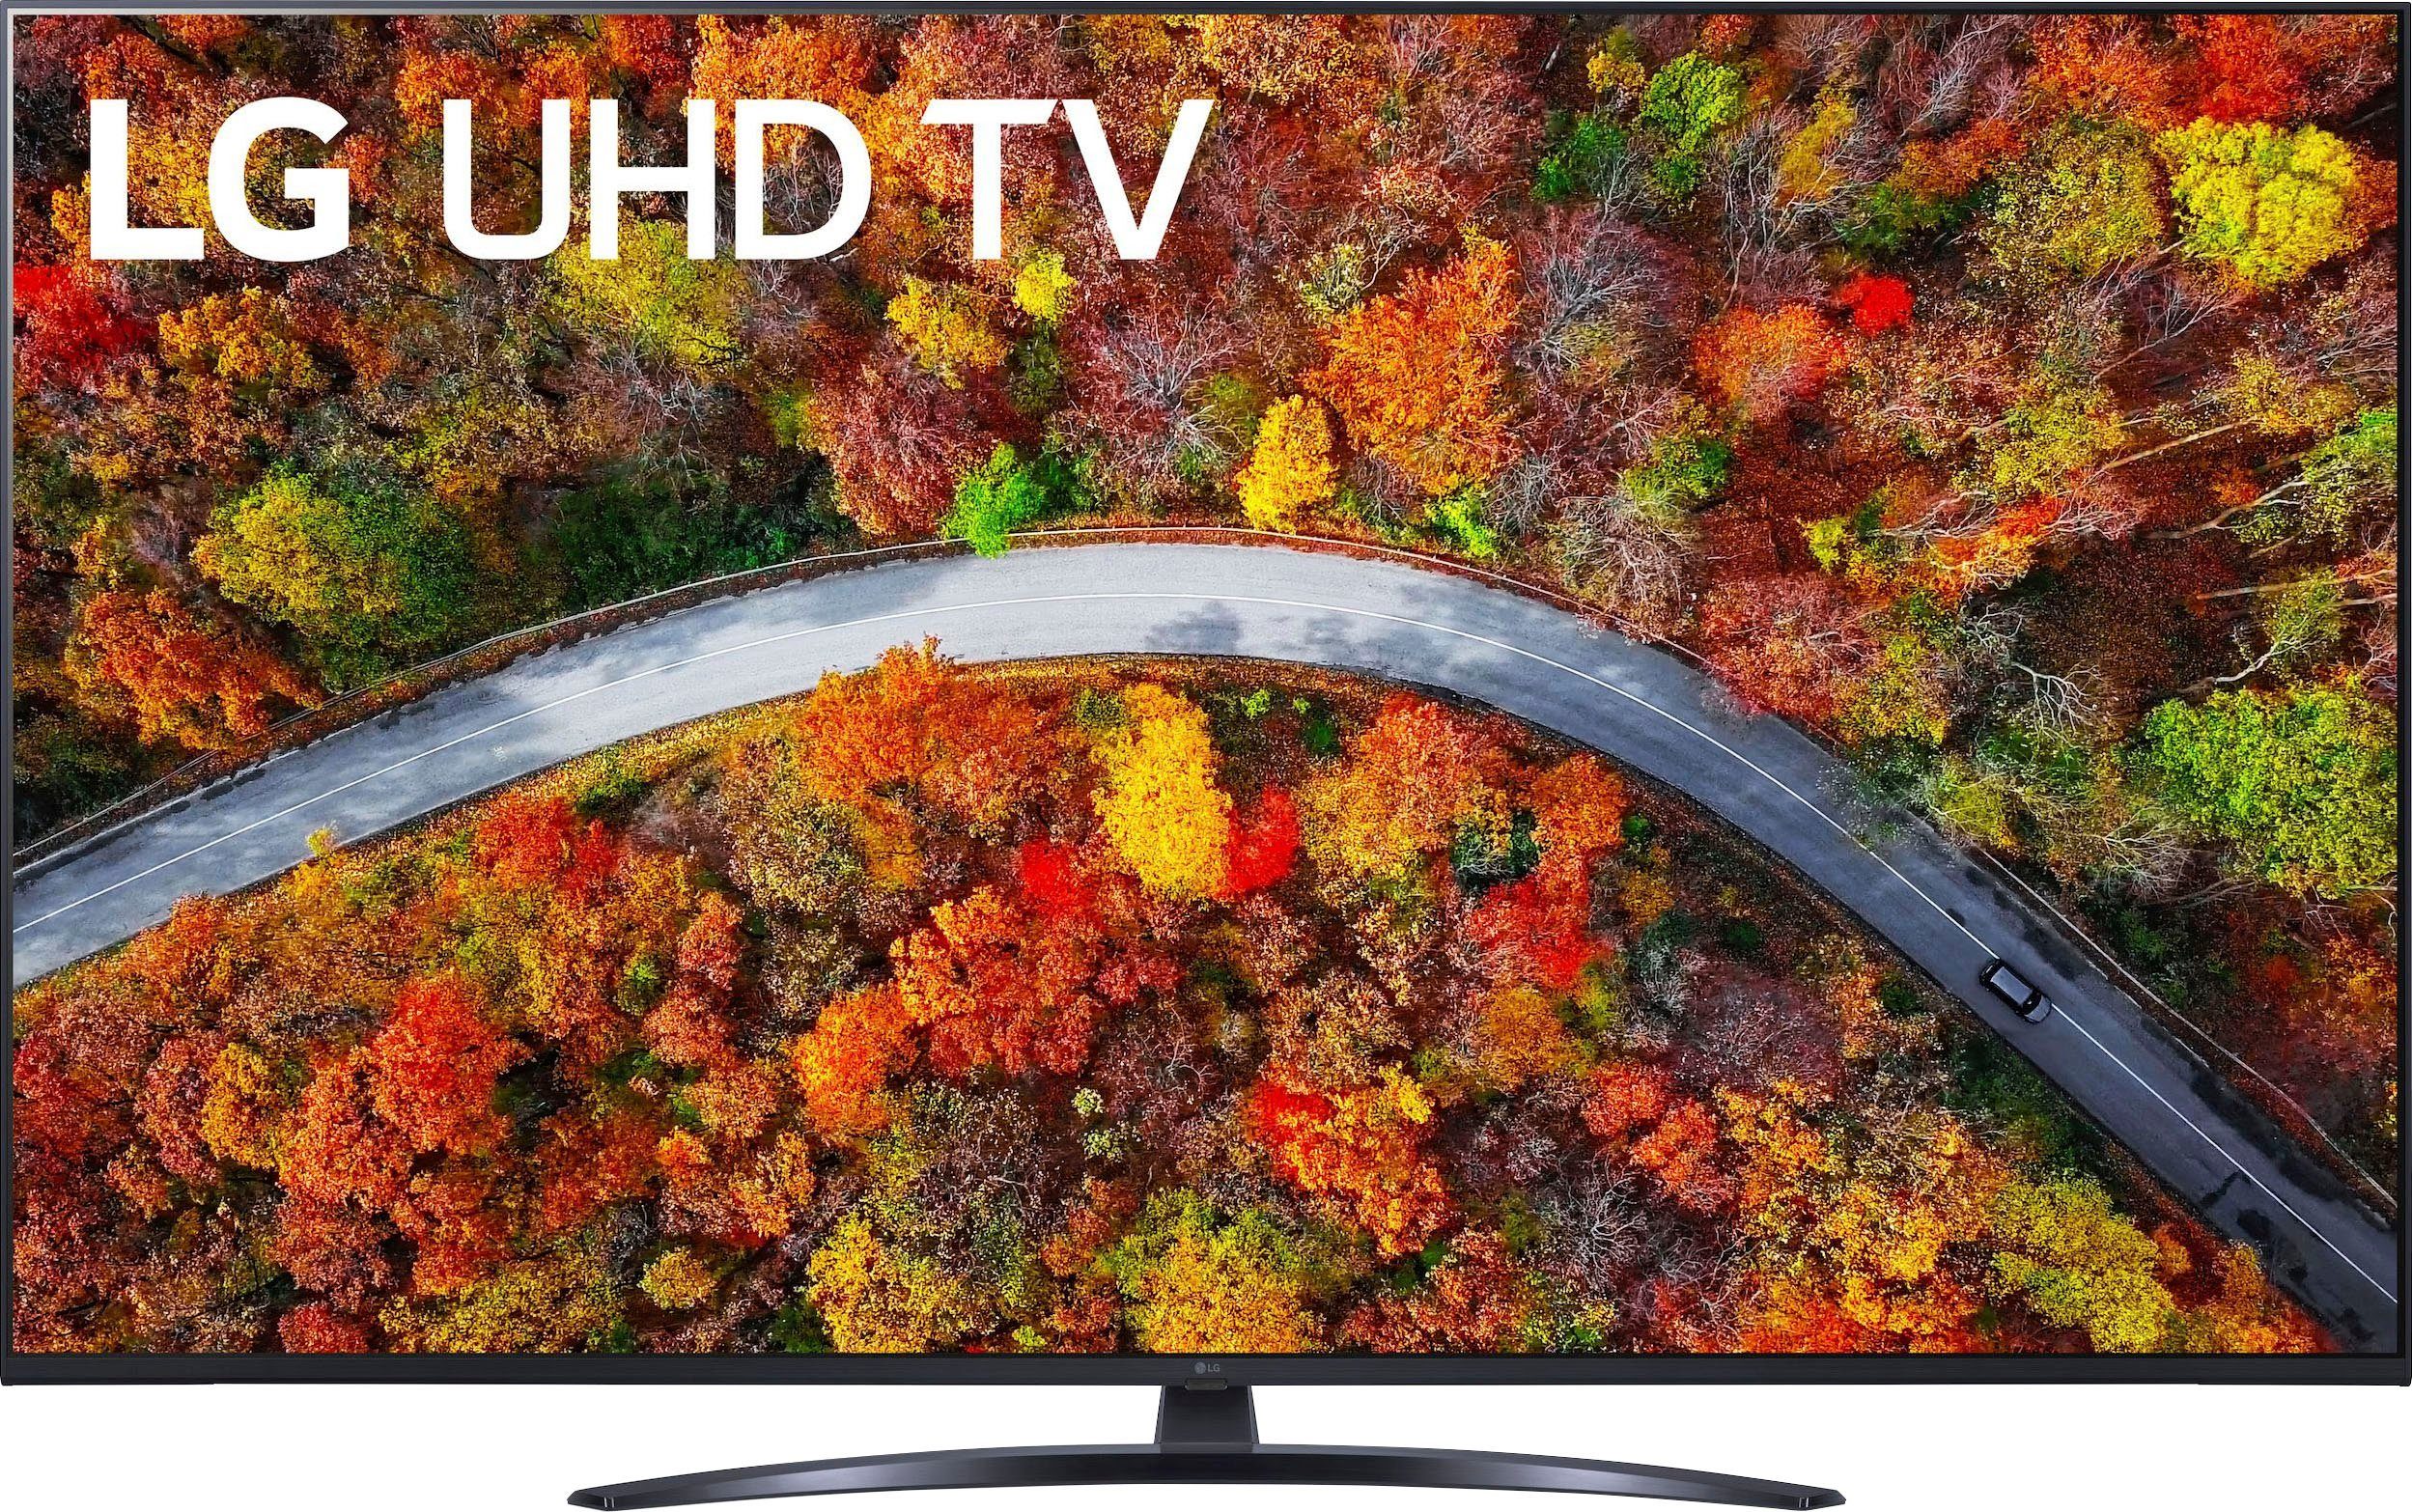 LG 50UP81009LR LCD-LED TV with 50 inches and 4K